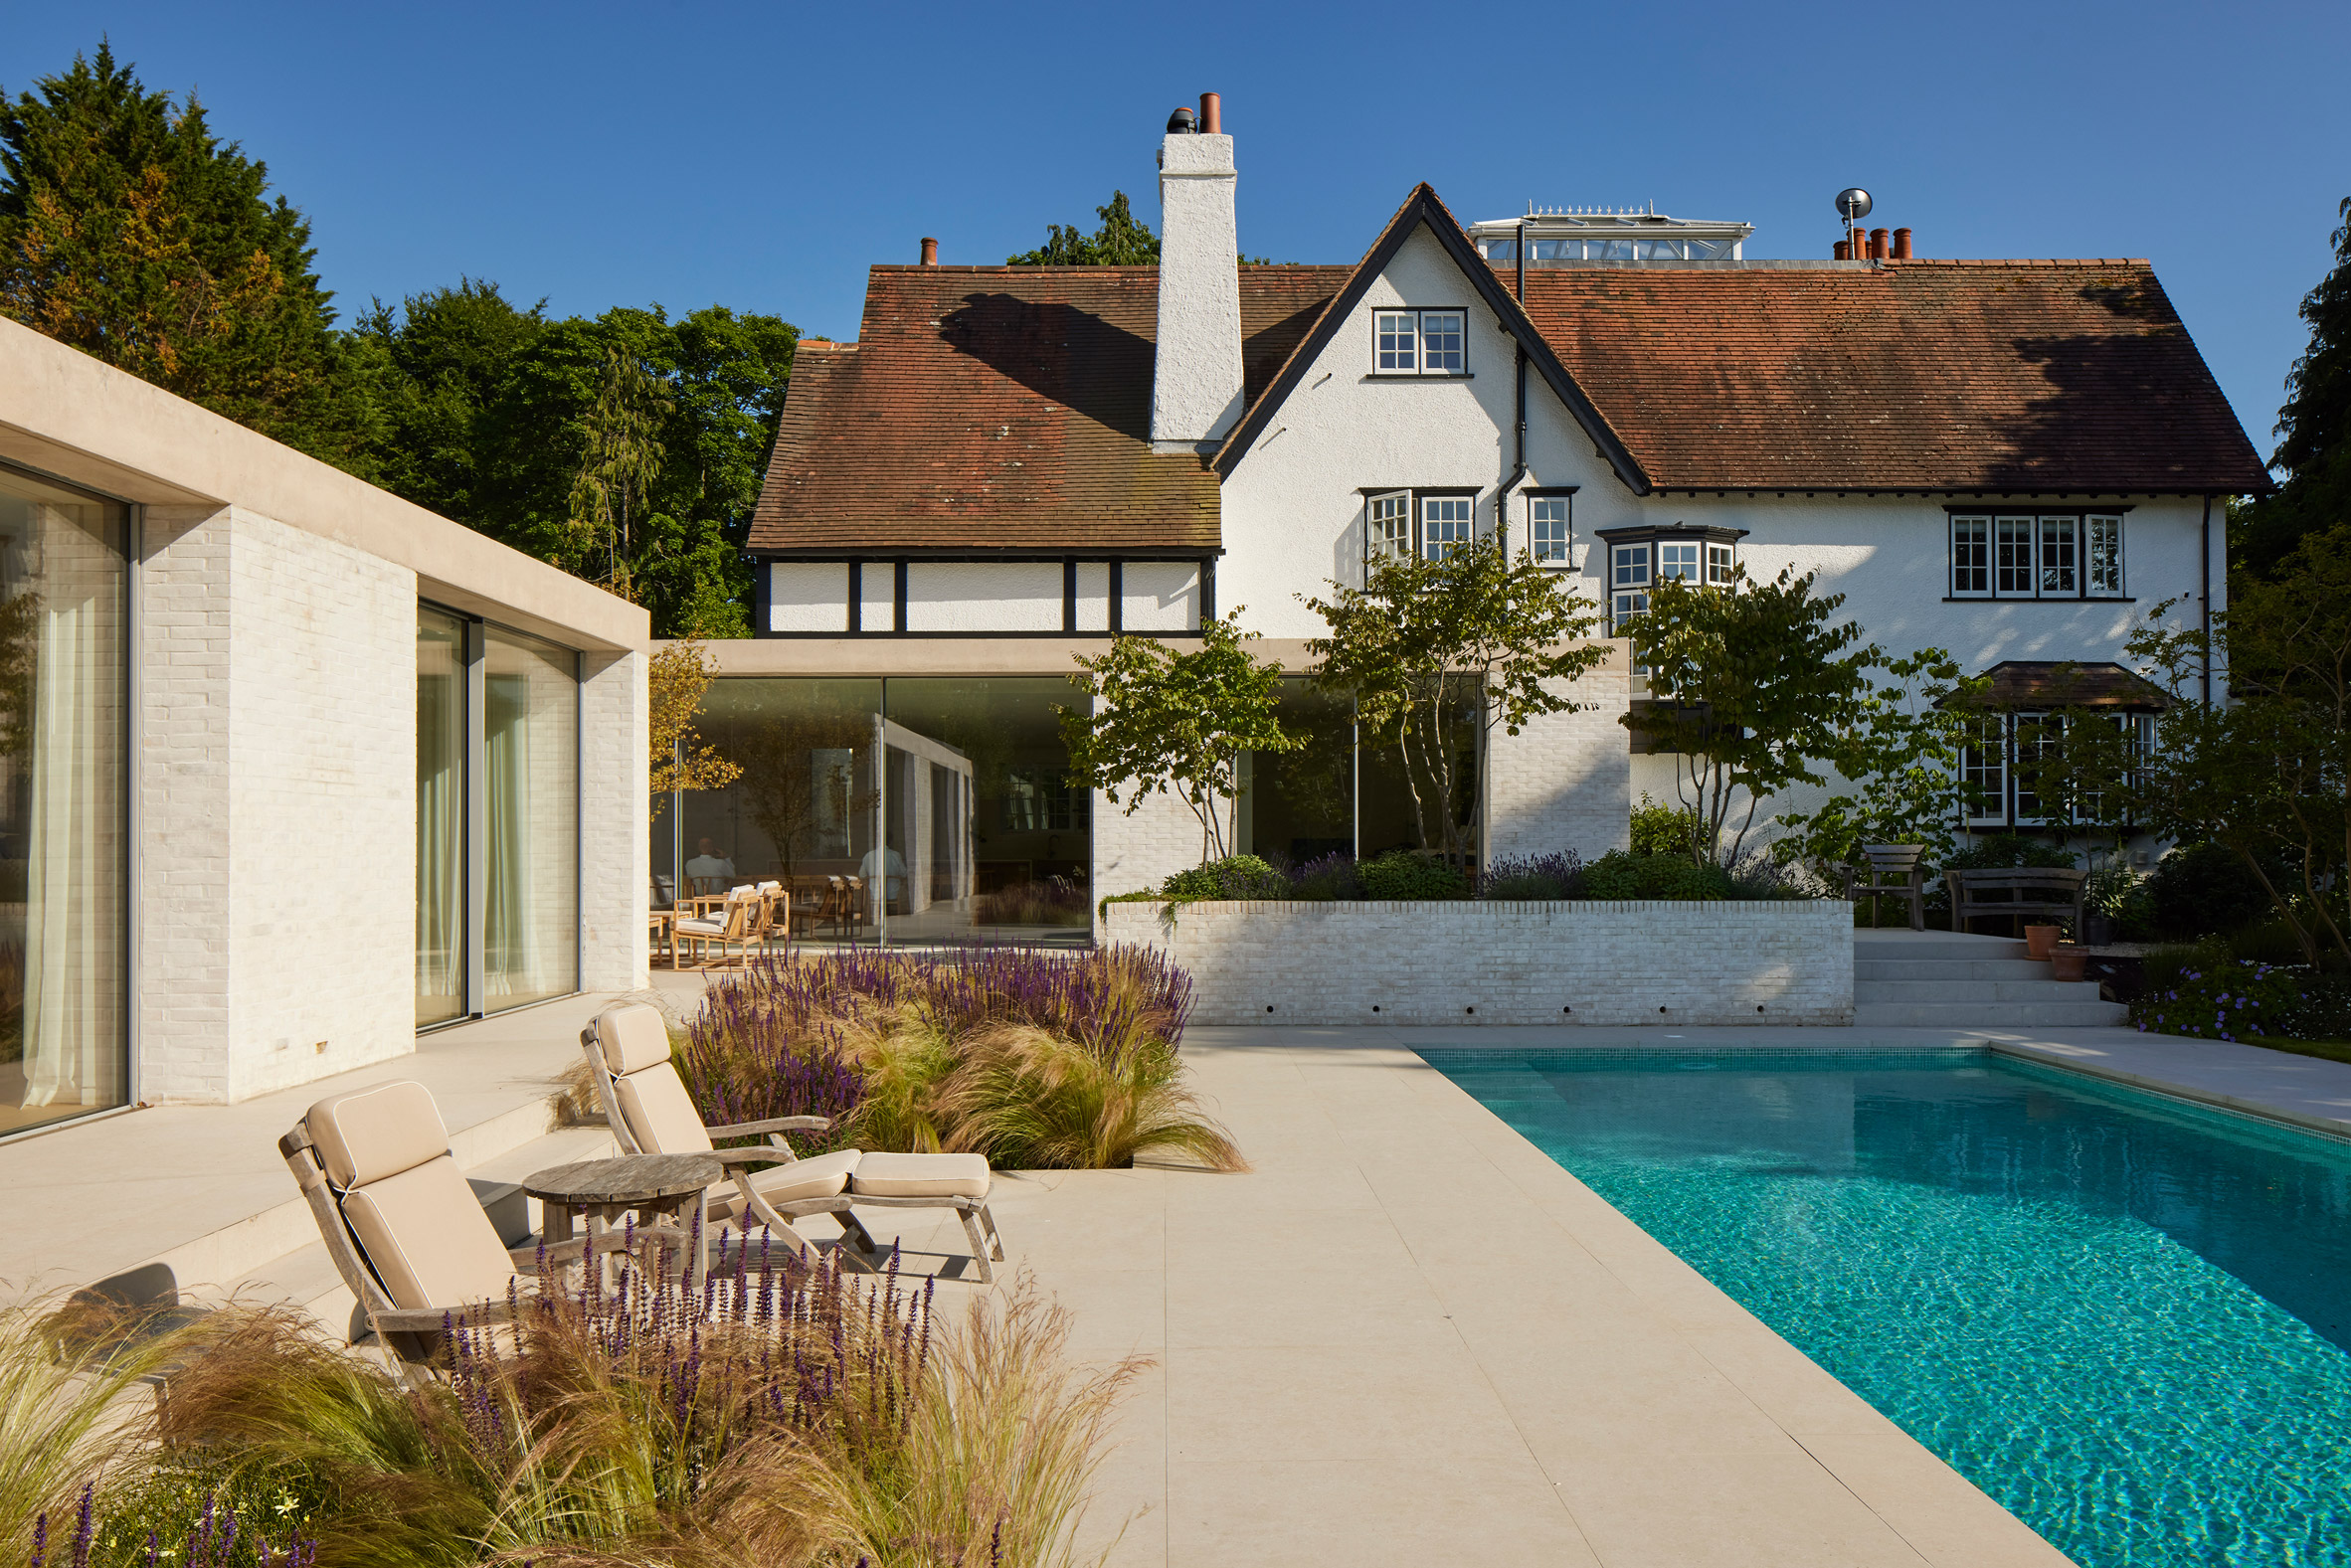 Surrey house with contemporary extension and swimming pool